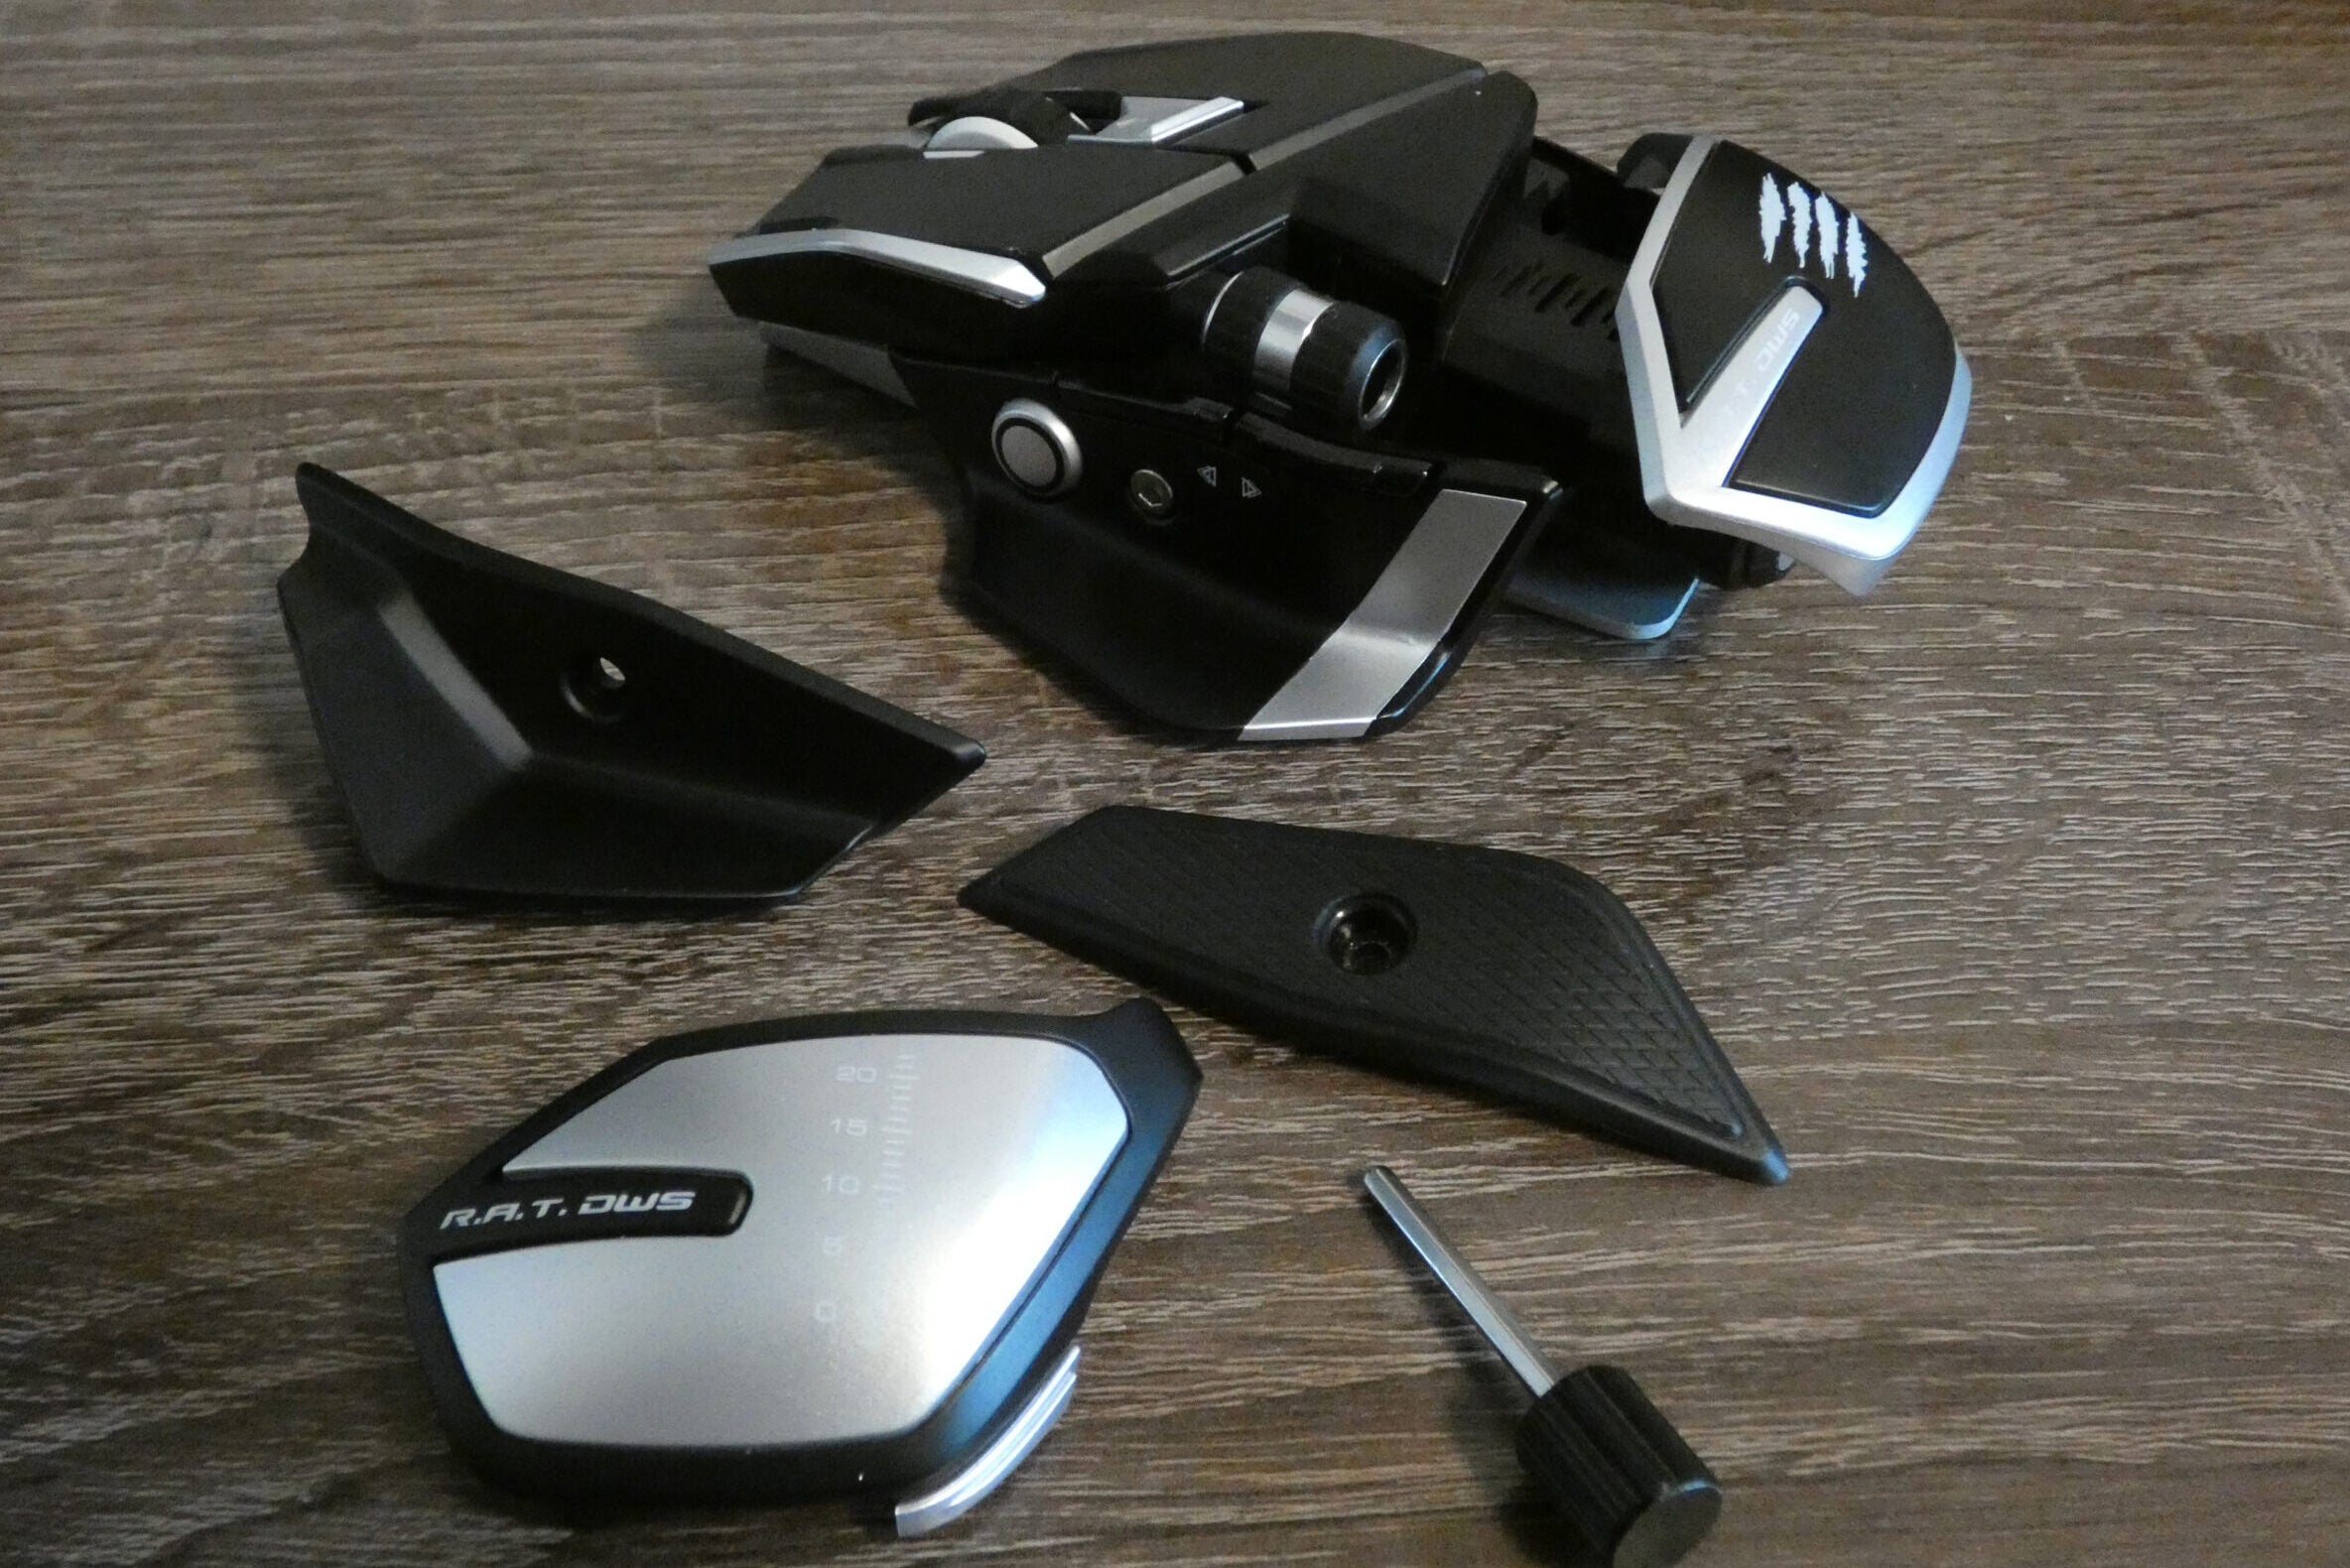 cloe look of an opened up gaming mouse